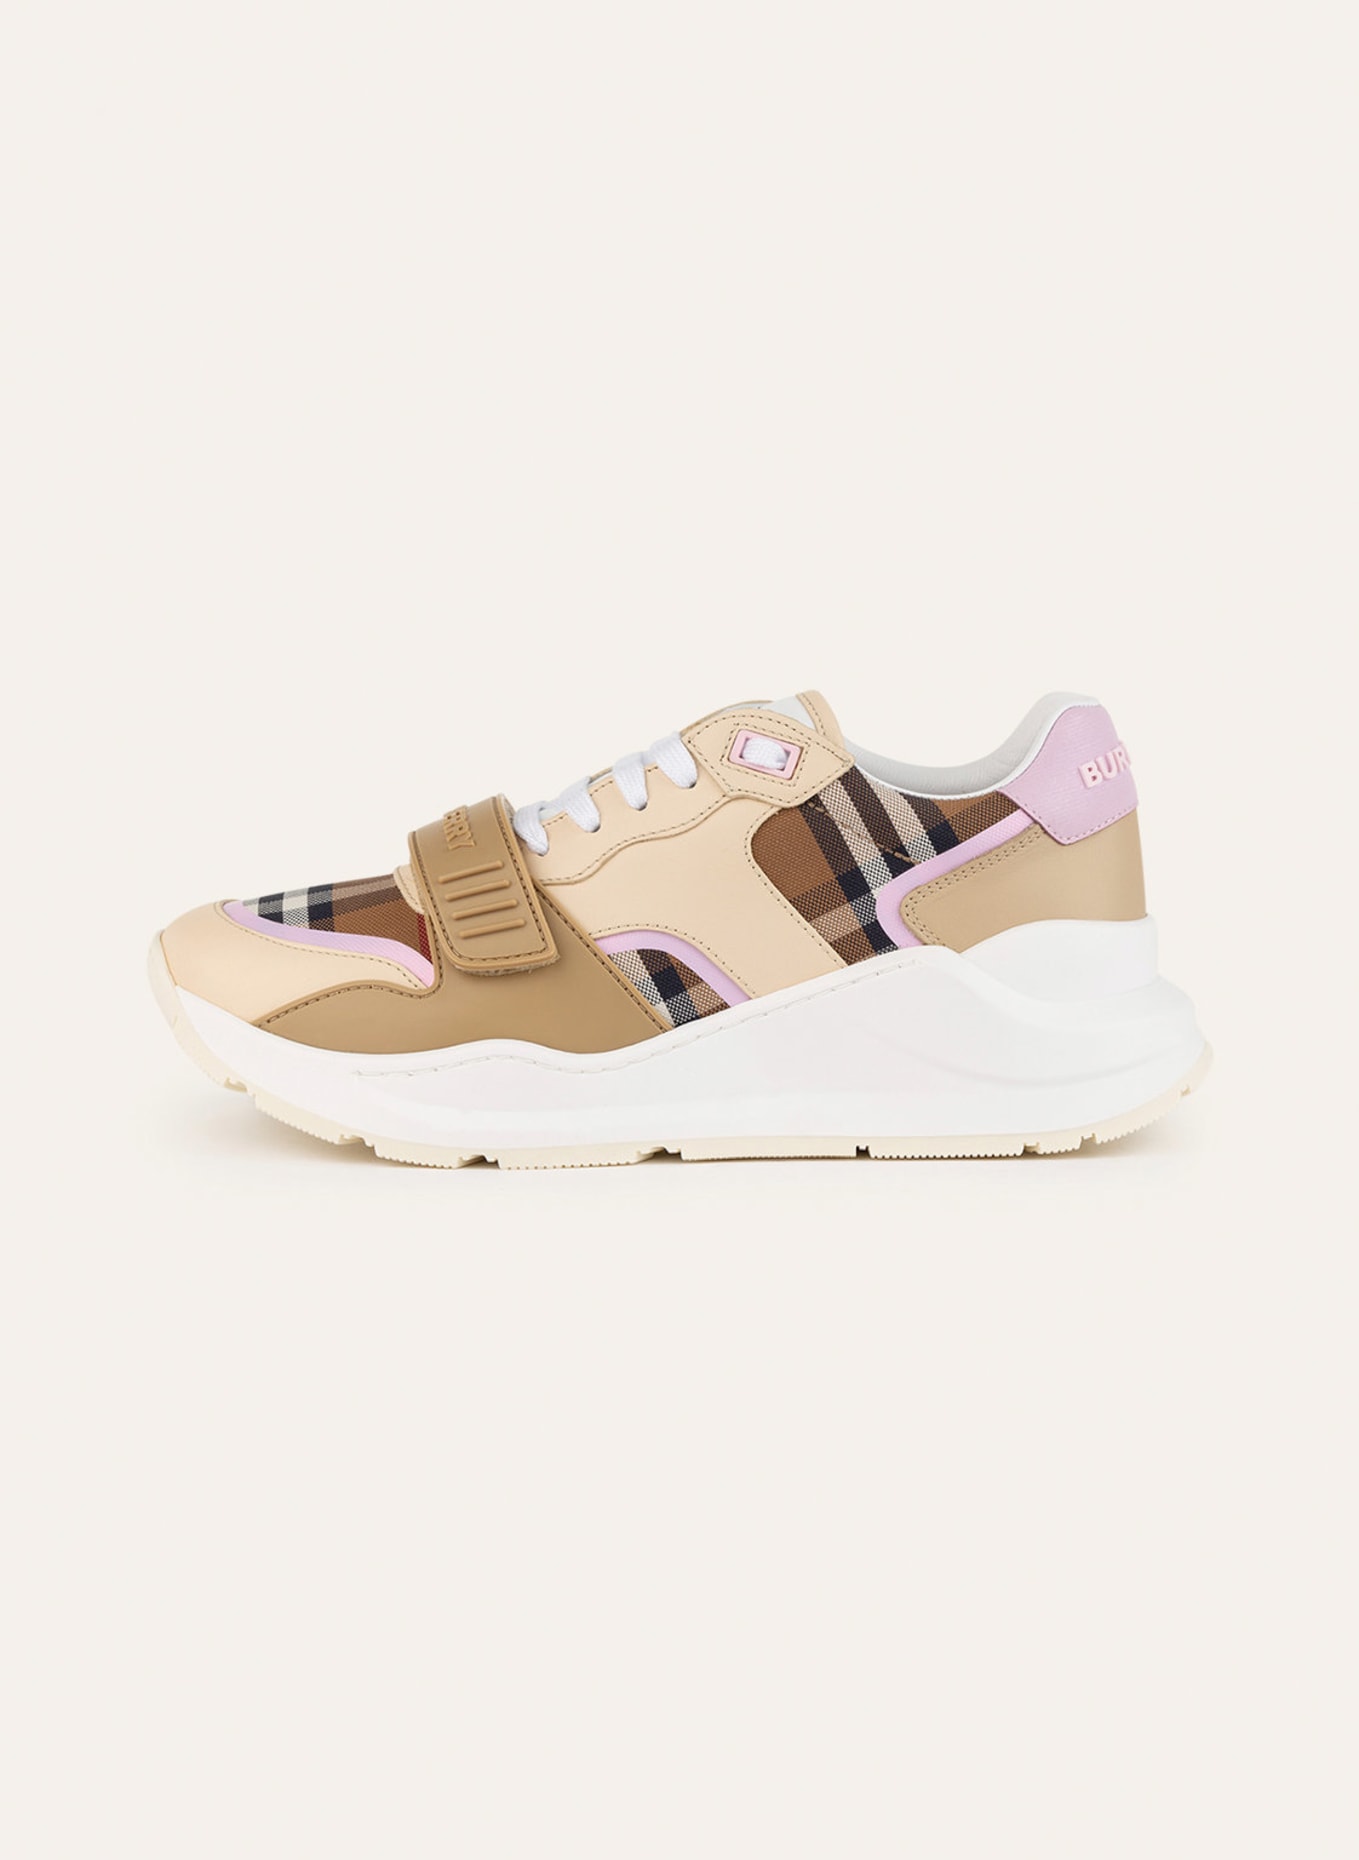 BURBERRY Sneakers RAMSEY, Color: LIGHT BROWN/ LIGHT PINK/ BROWN (Image 4)